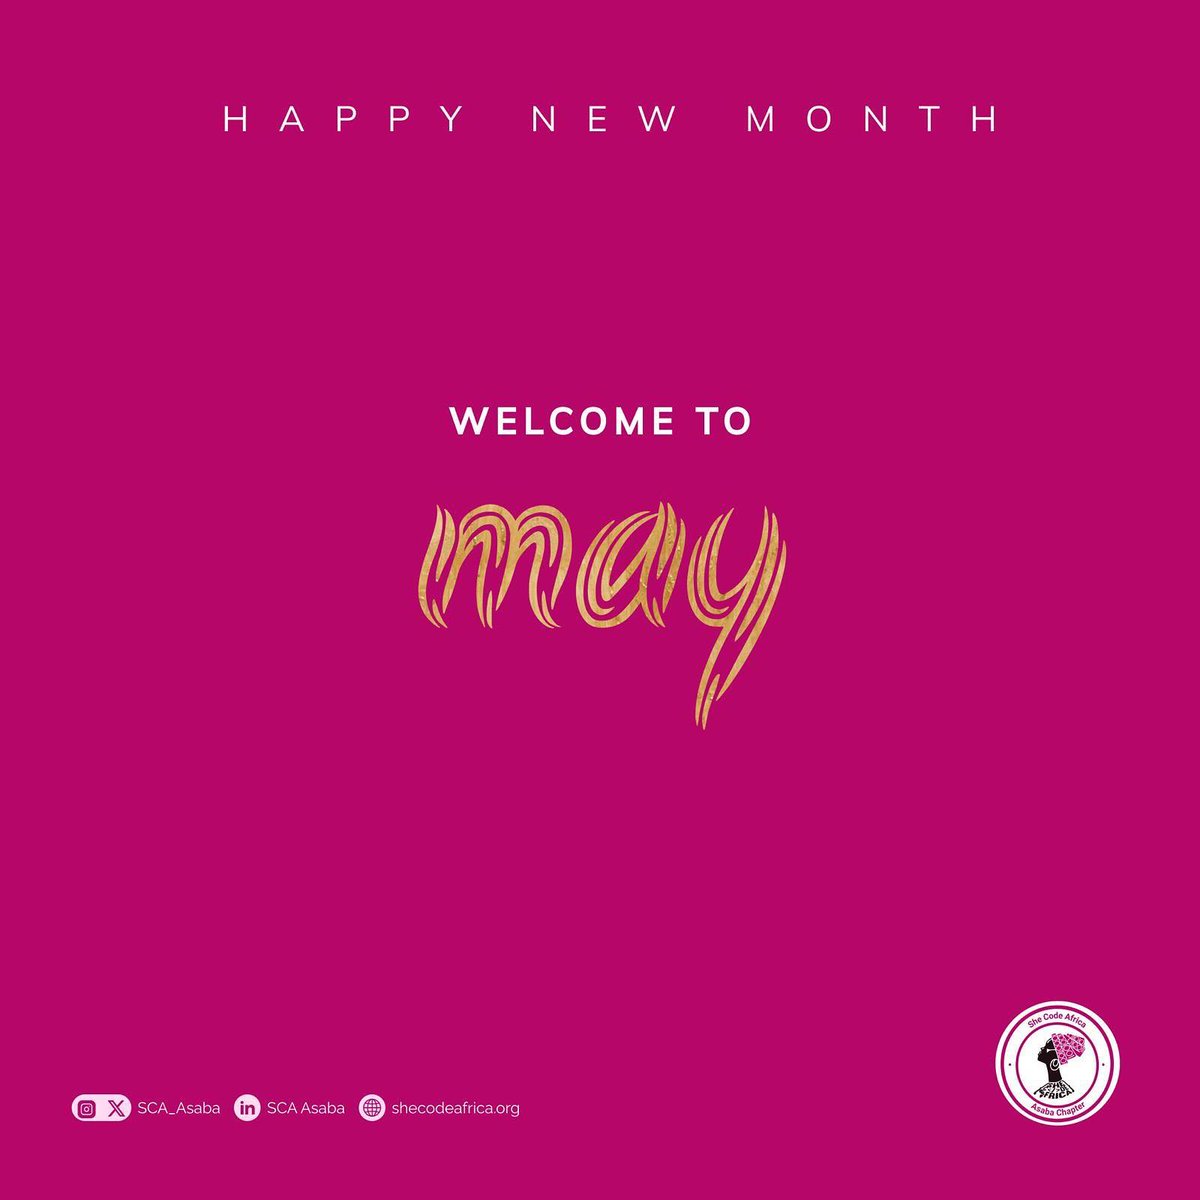 Happy May! As we step into this new month, let’s embrace the opportunities and possibilities it brings. May this month of May be filled with growth, prosperity and joy for you and everyone around you. Wishing you the best of the best. #newmonth #may JAMB | Big Wiz